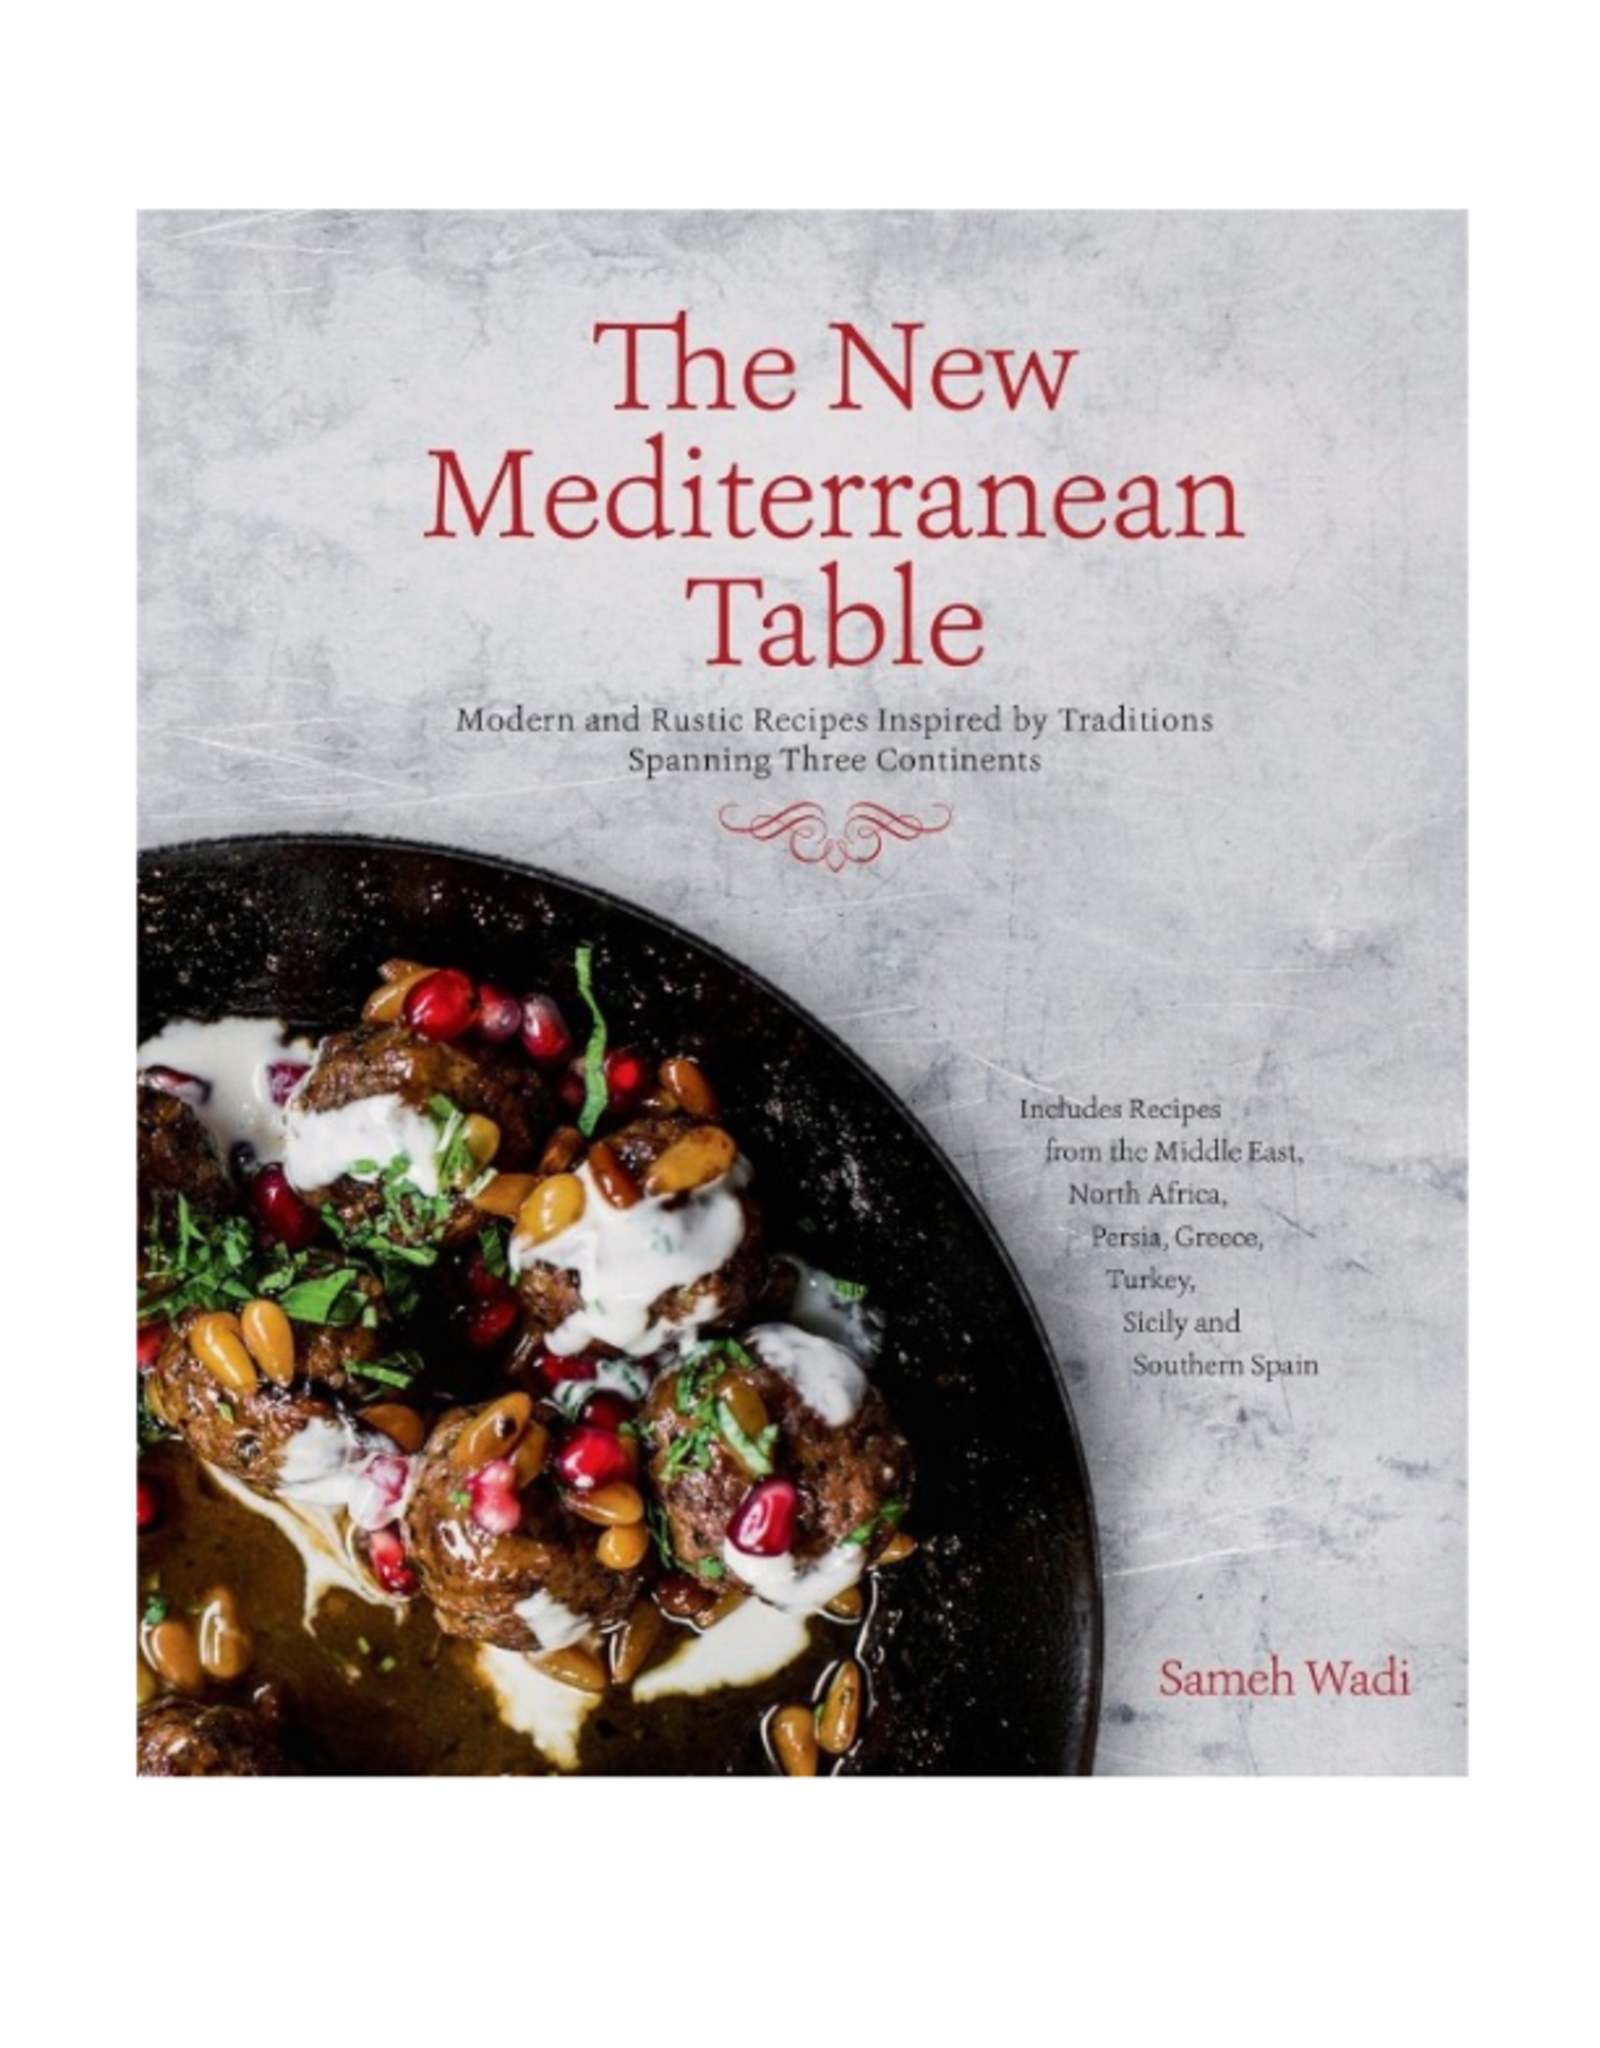 The New Mediterranean Table: Modern and Rustic Recipes Inspired by Traditions Spanning Three Continents